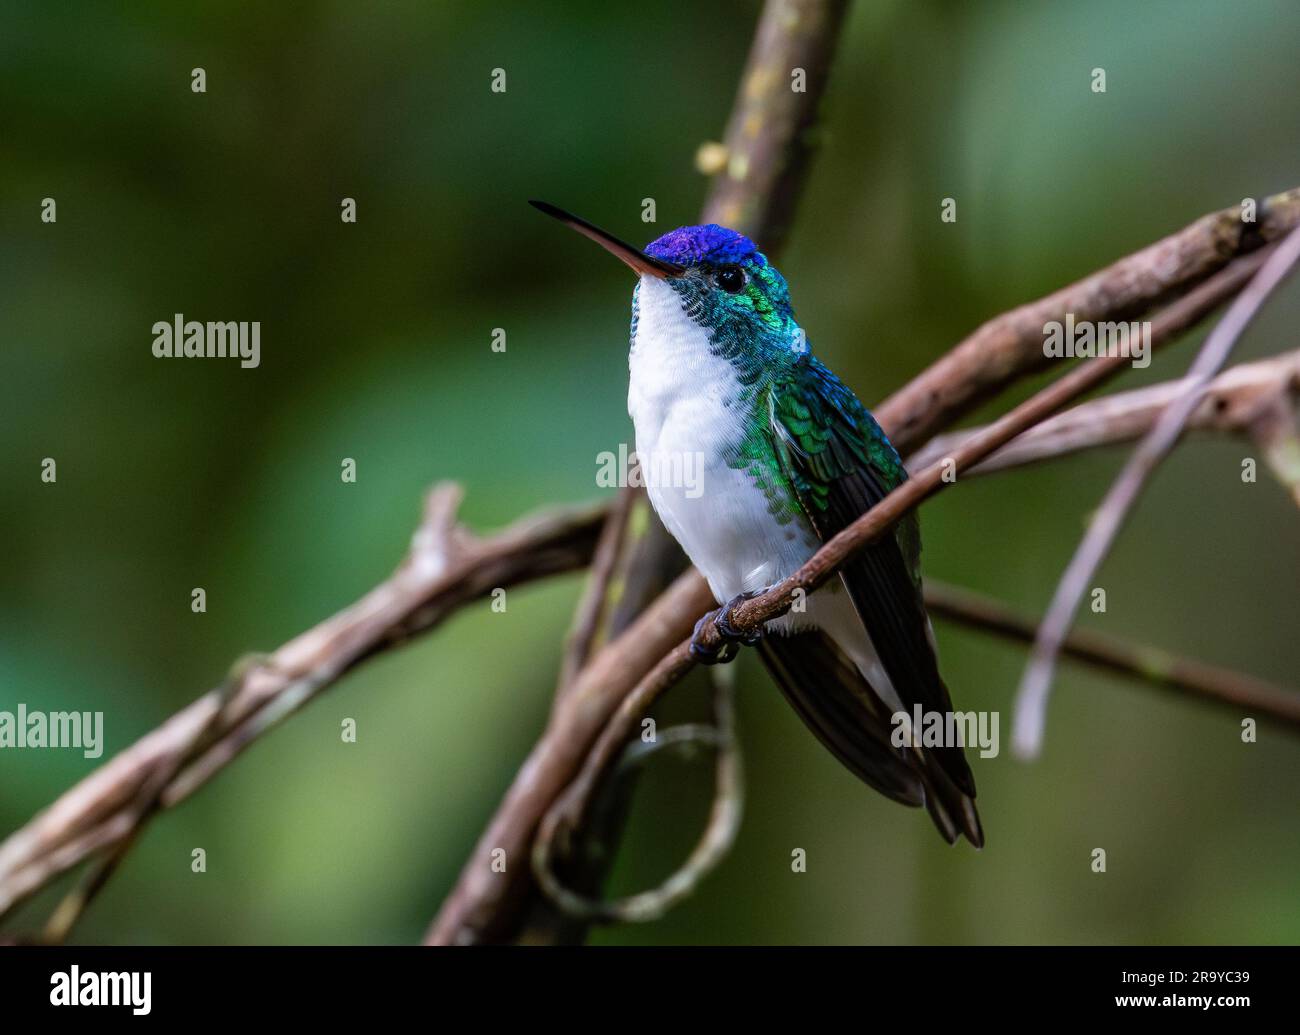 A male Andean Emerald hummingbird (Uranomitra franciae) perched on a branch. Colombia, South America. Stock Photo